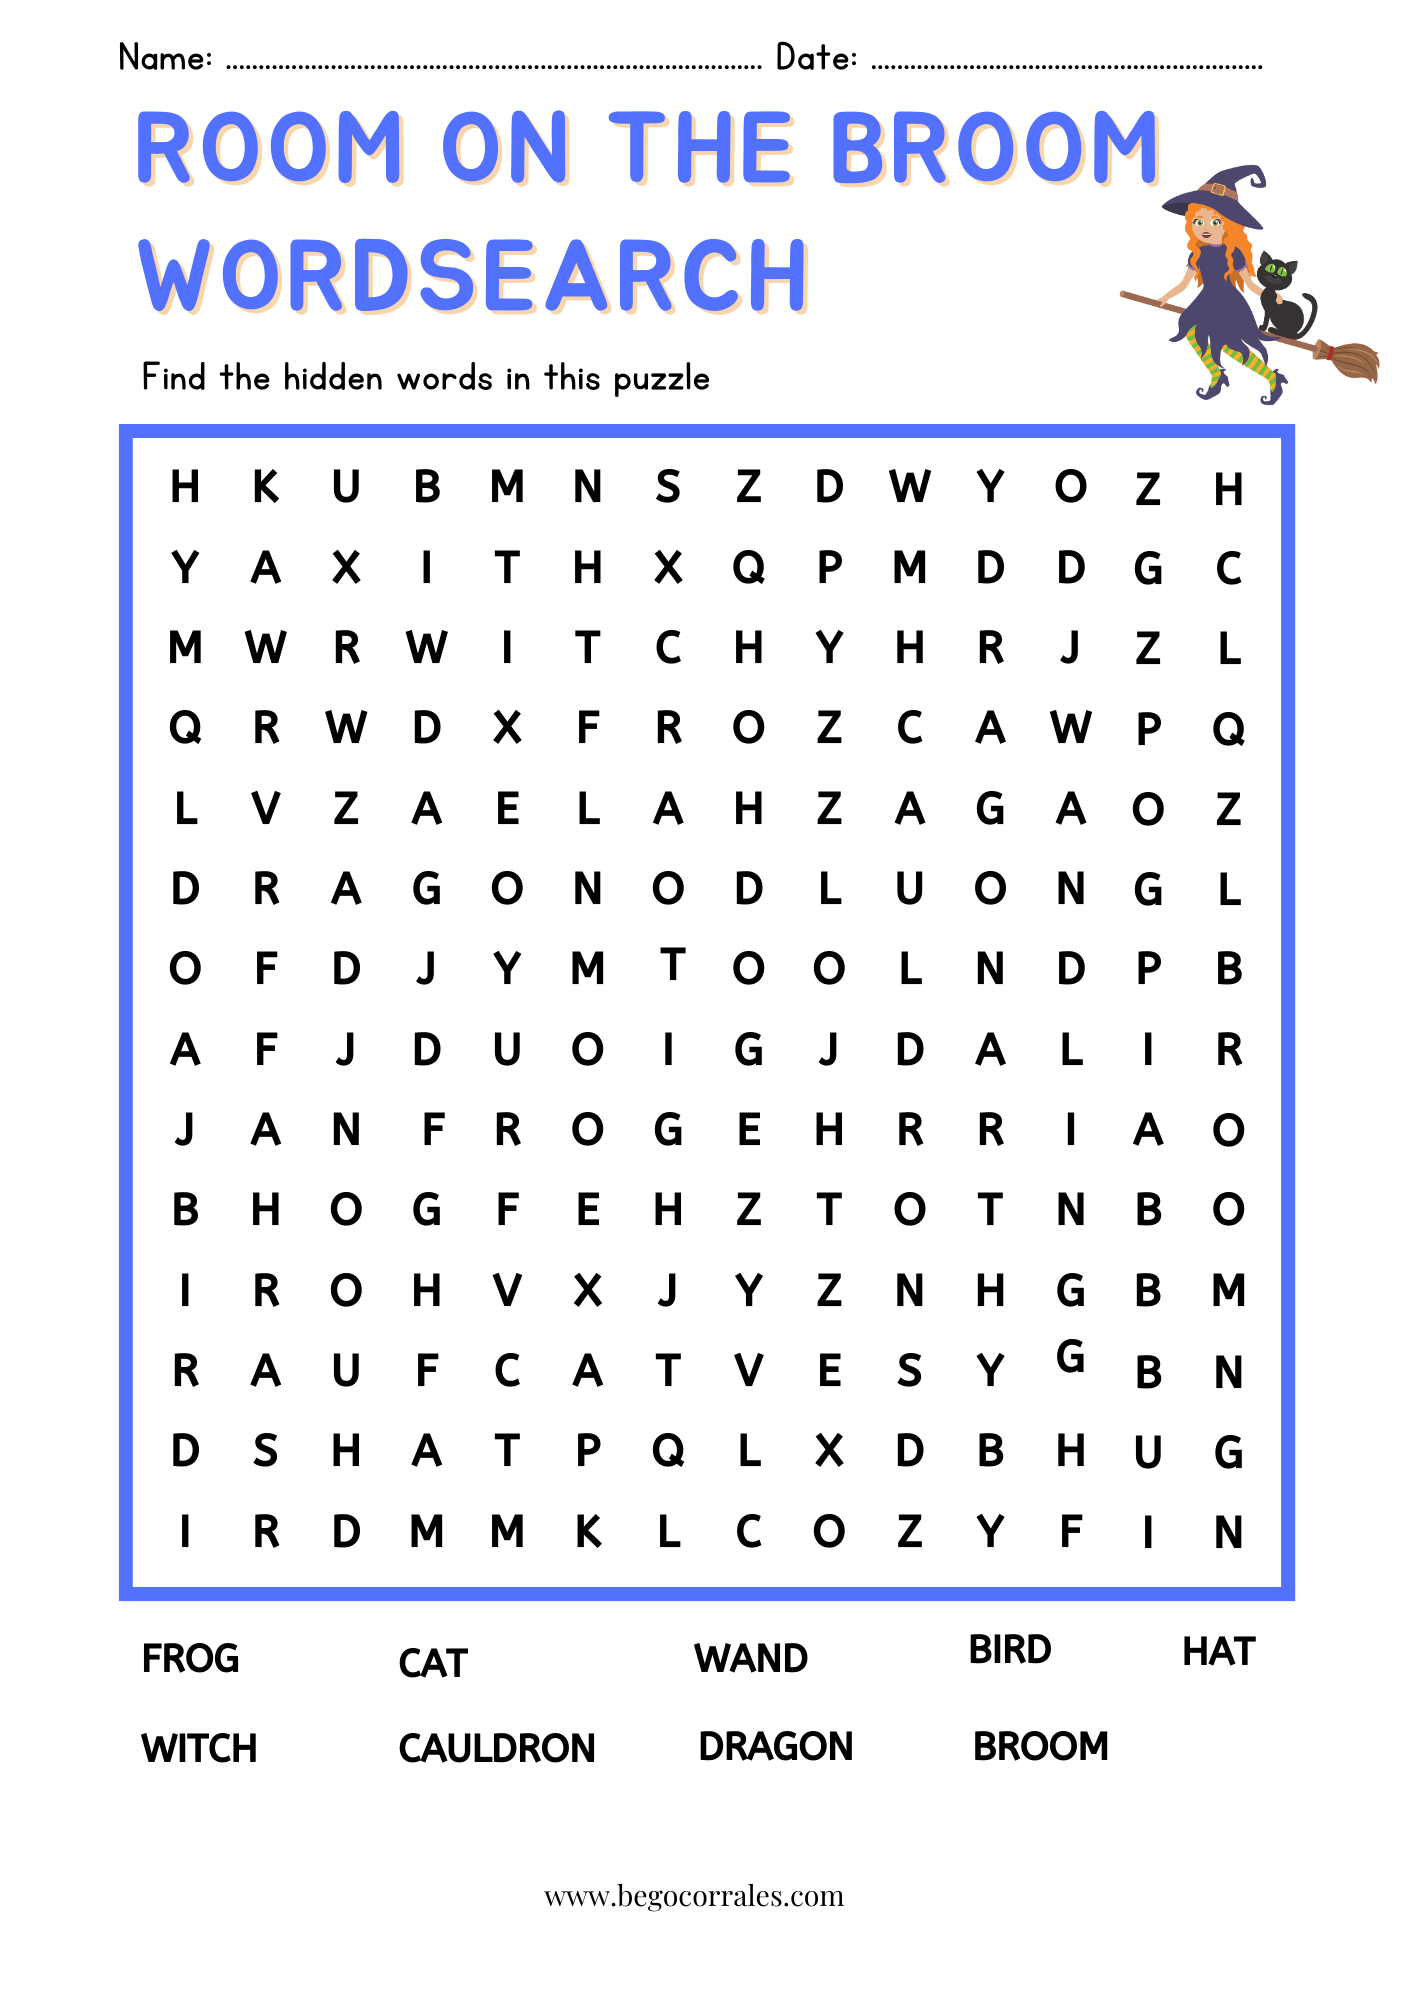 Room on the Broom wordsearch